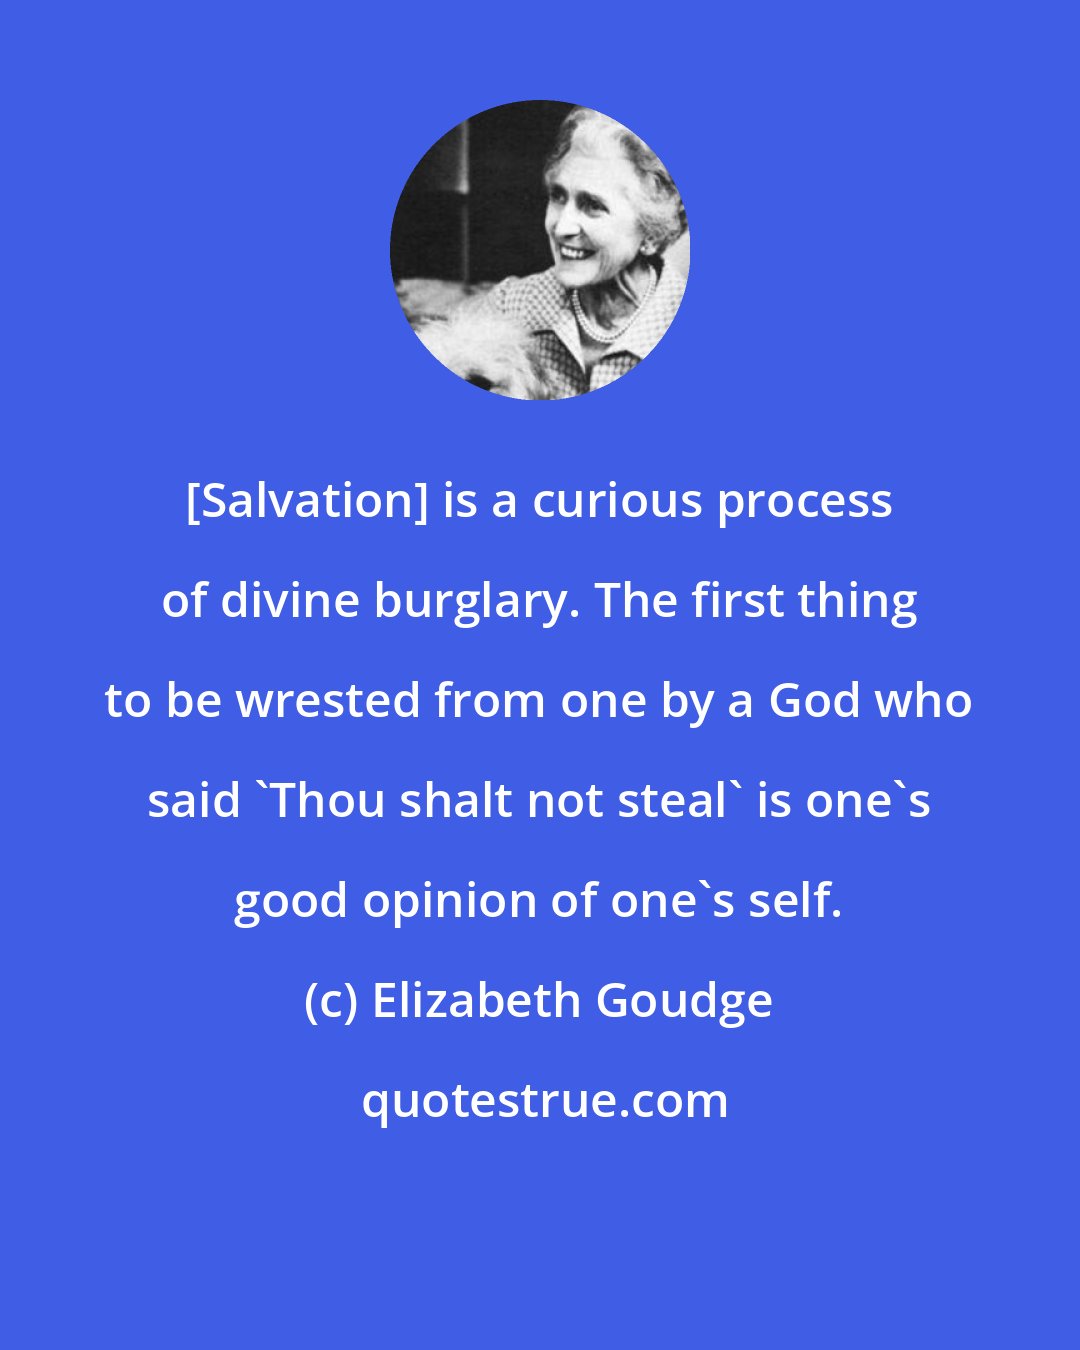 Elizabeth Goudge: [Salvation] is a curious process of divine burglary. The first thing to be wrested from one by a God who said 'Thou shalt not steal' is one's good opinion of one's self.